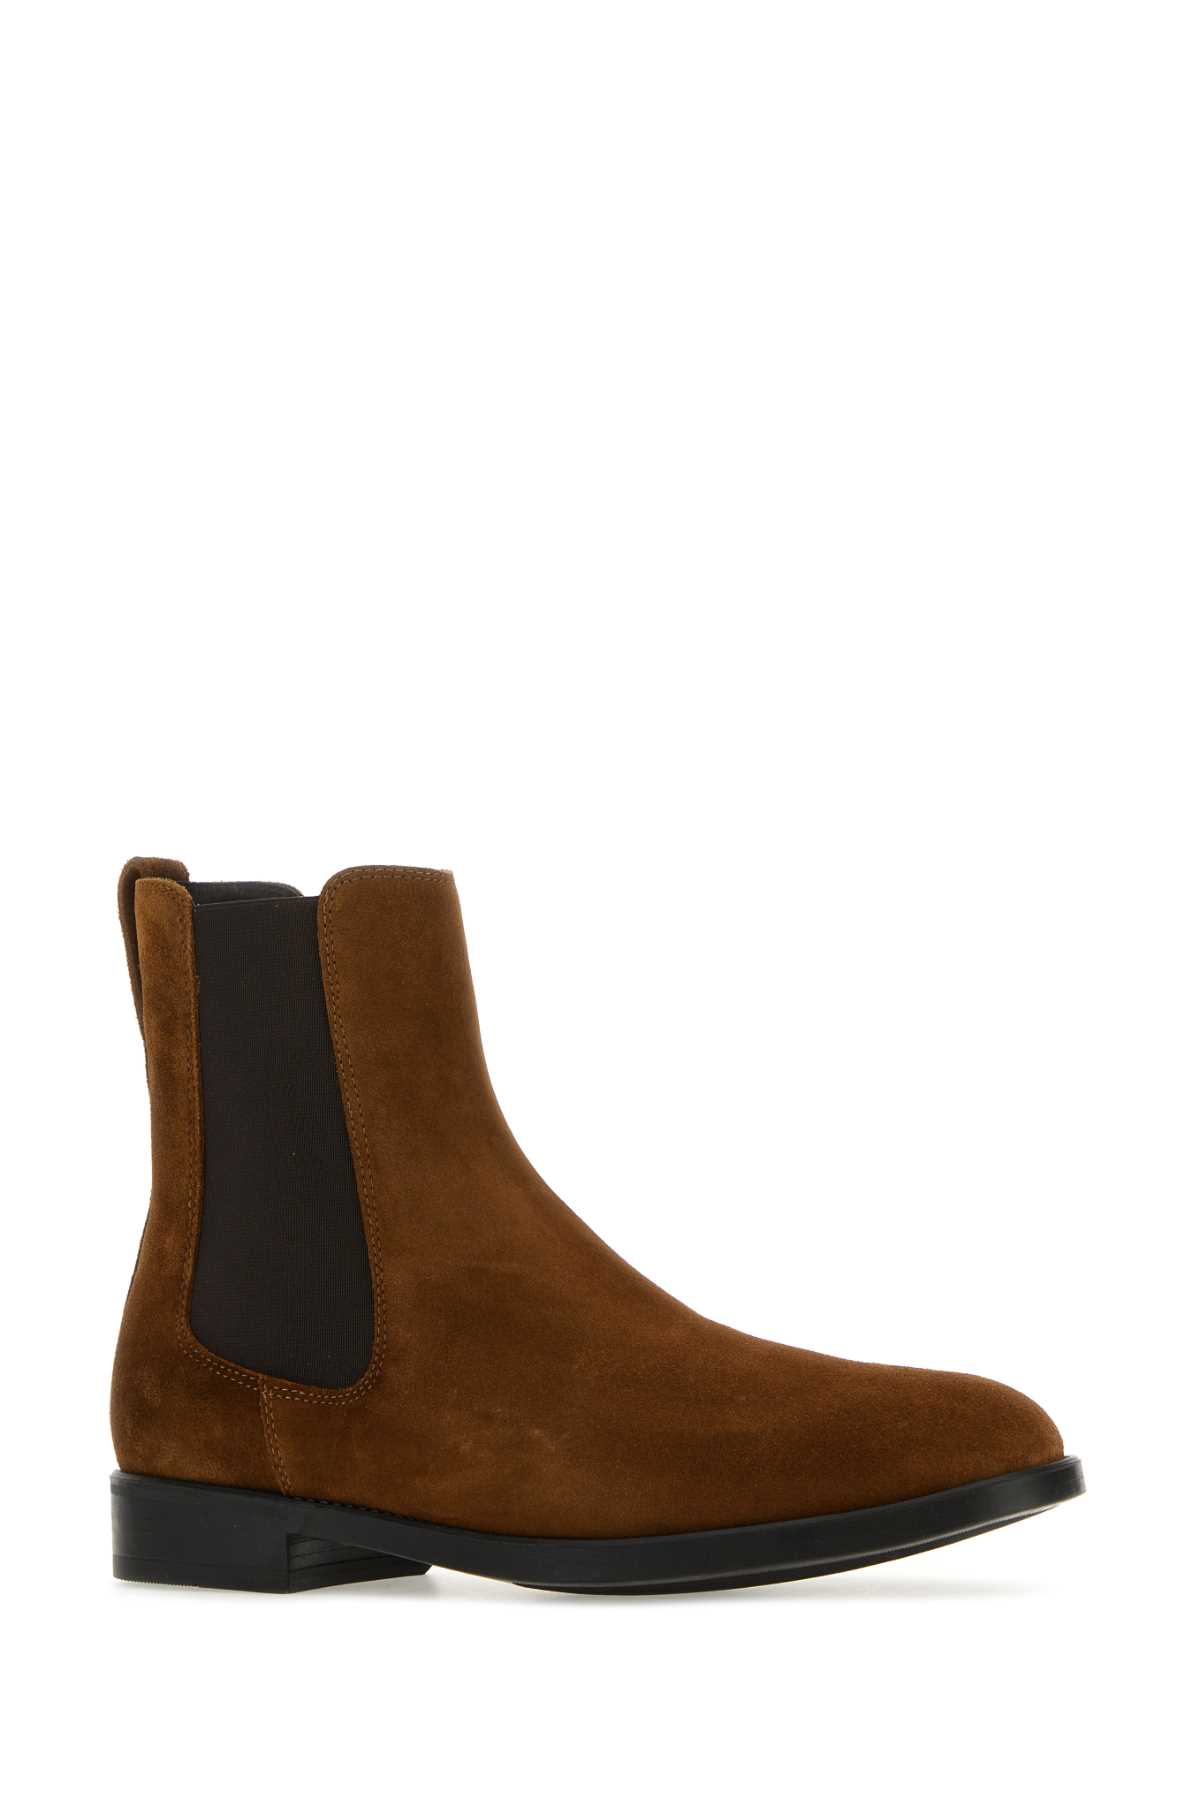 Tom Ford Caramel Suede Ankle Boots In Tobacco